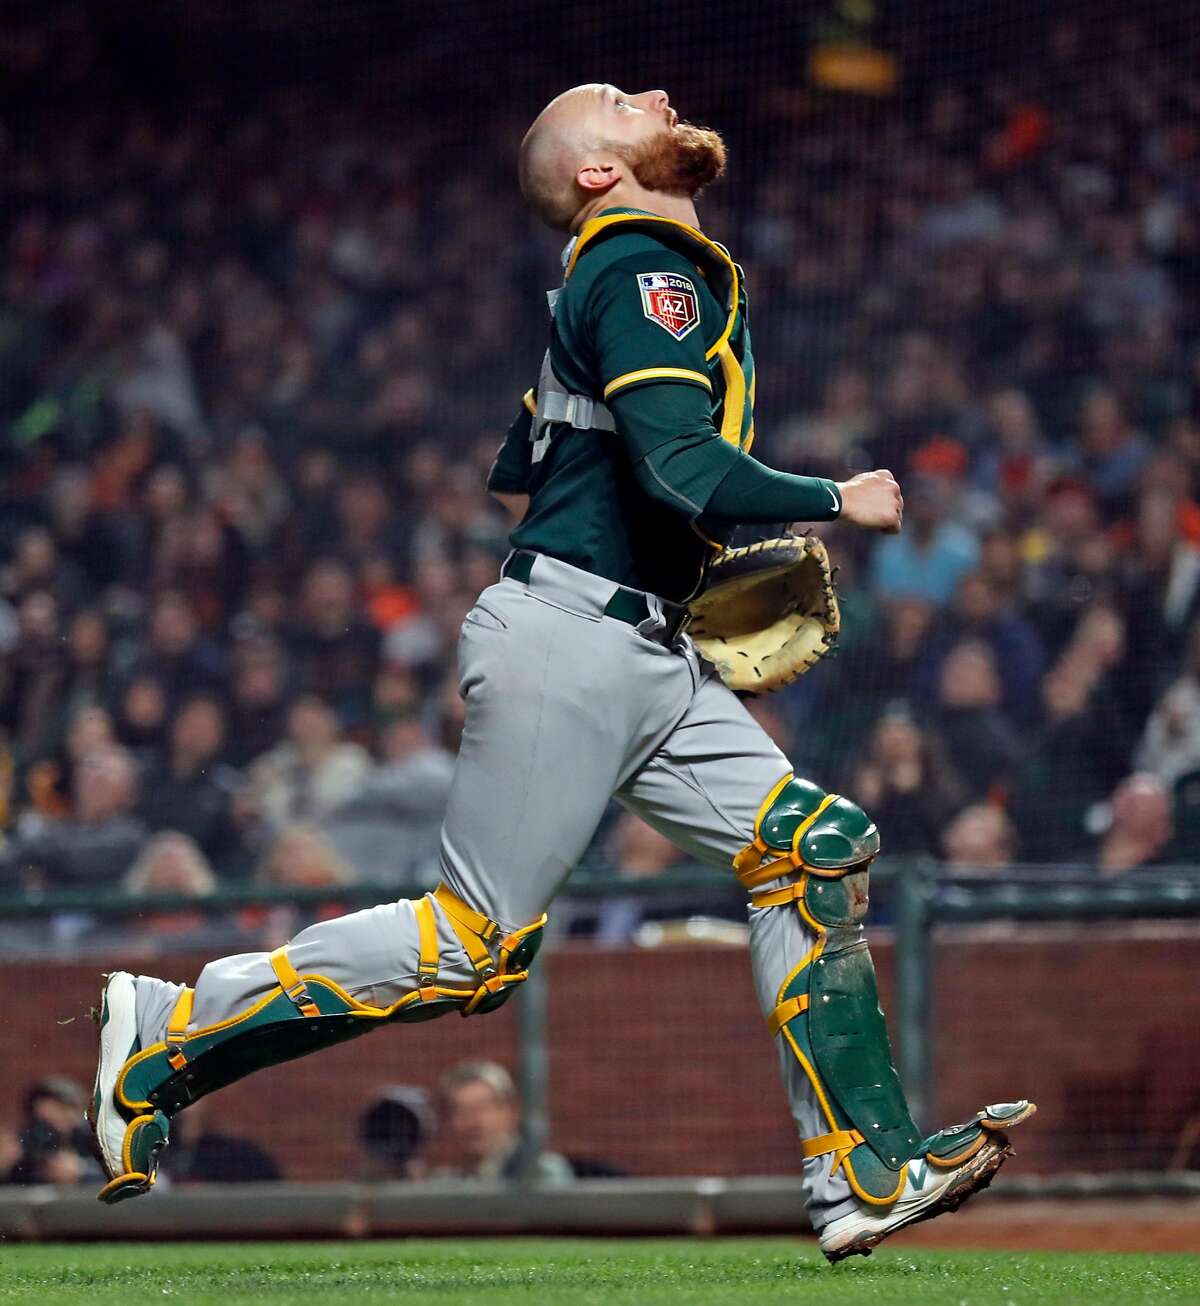 Oakland Athletics' Jonathan Lucroy tracks a pop up off the bat of San Francisco Giants' Buster Posey in 3rd inning during Bay Bridge Series game at AT&T Park in San Francisco, Calif., on Monday, March 26, 2018.